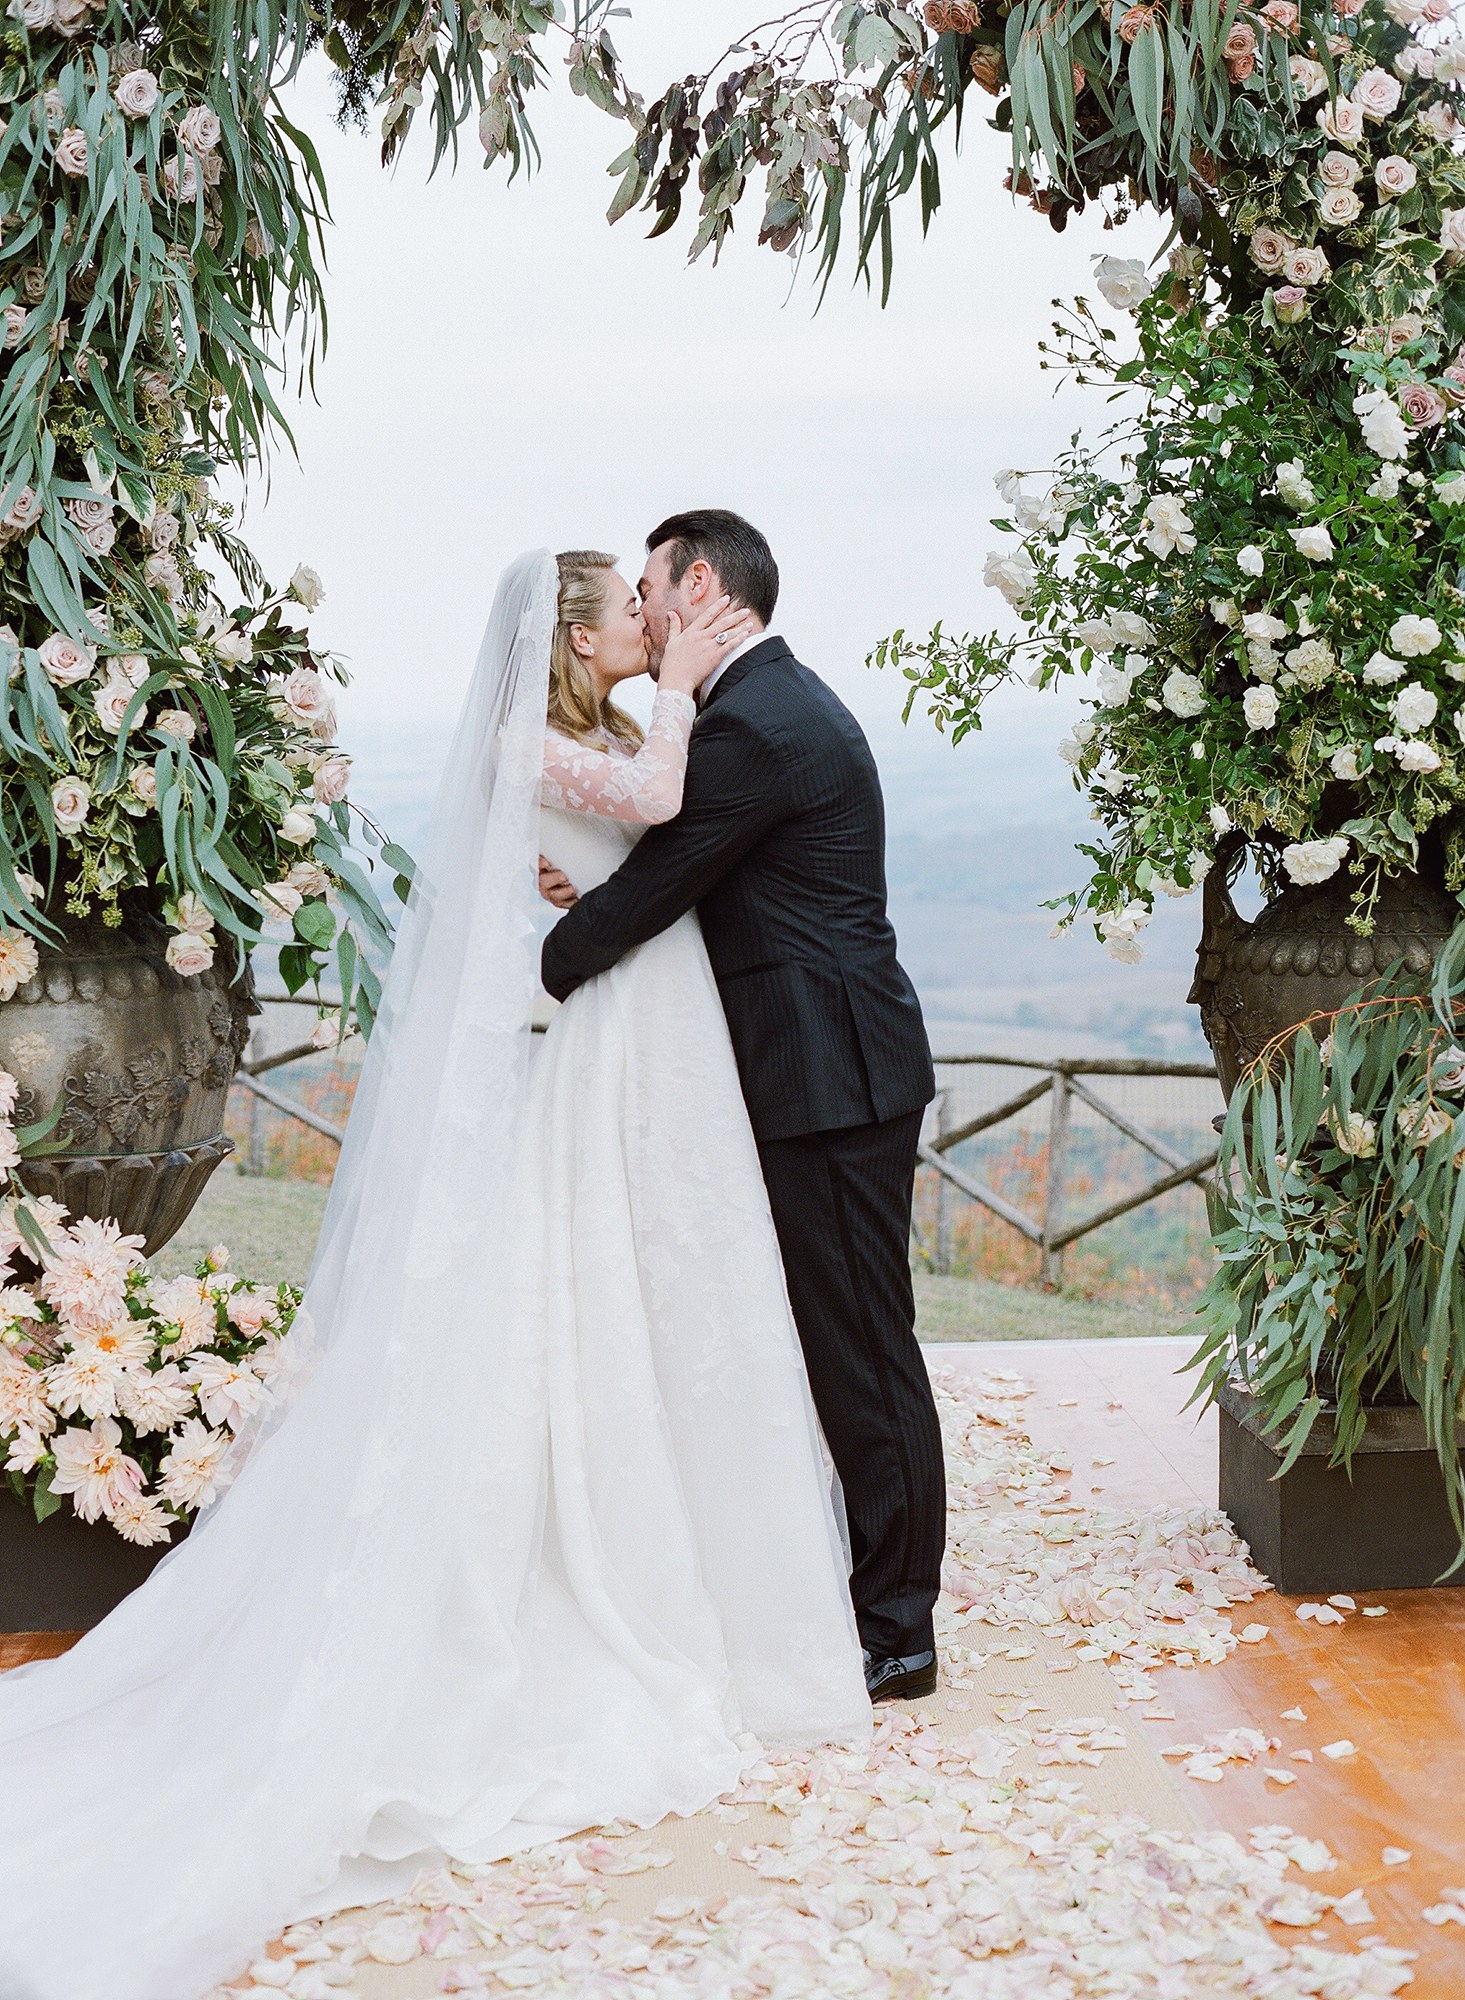 PHOTO: Photos from Kate Upton and Justin Verlander's Nov. 4 wedding appear exclusively on Vogue.com